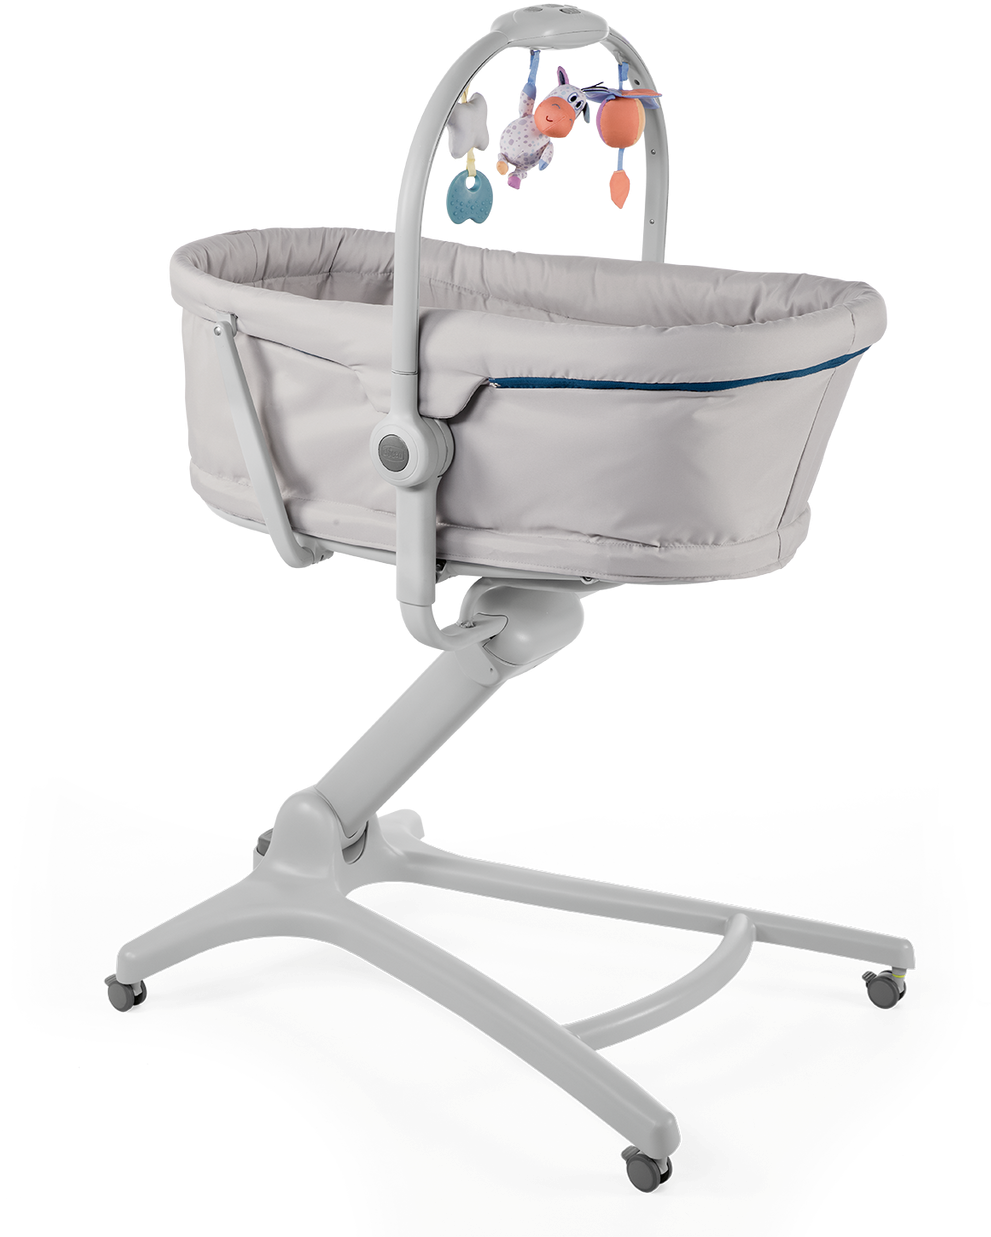 A Baby Cradle With Toys From It